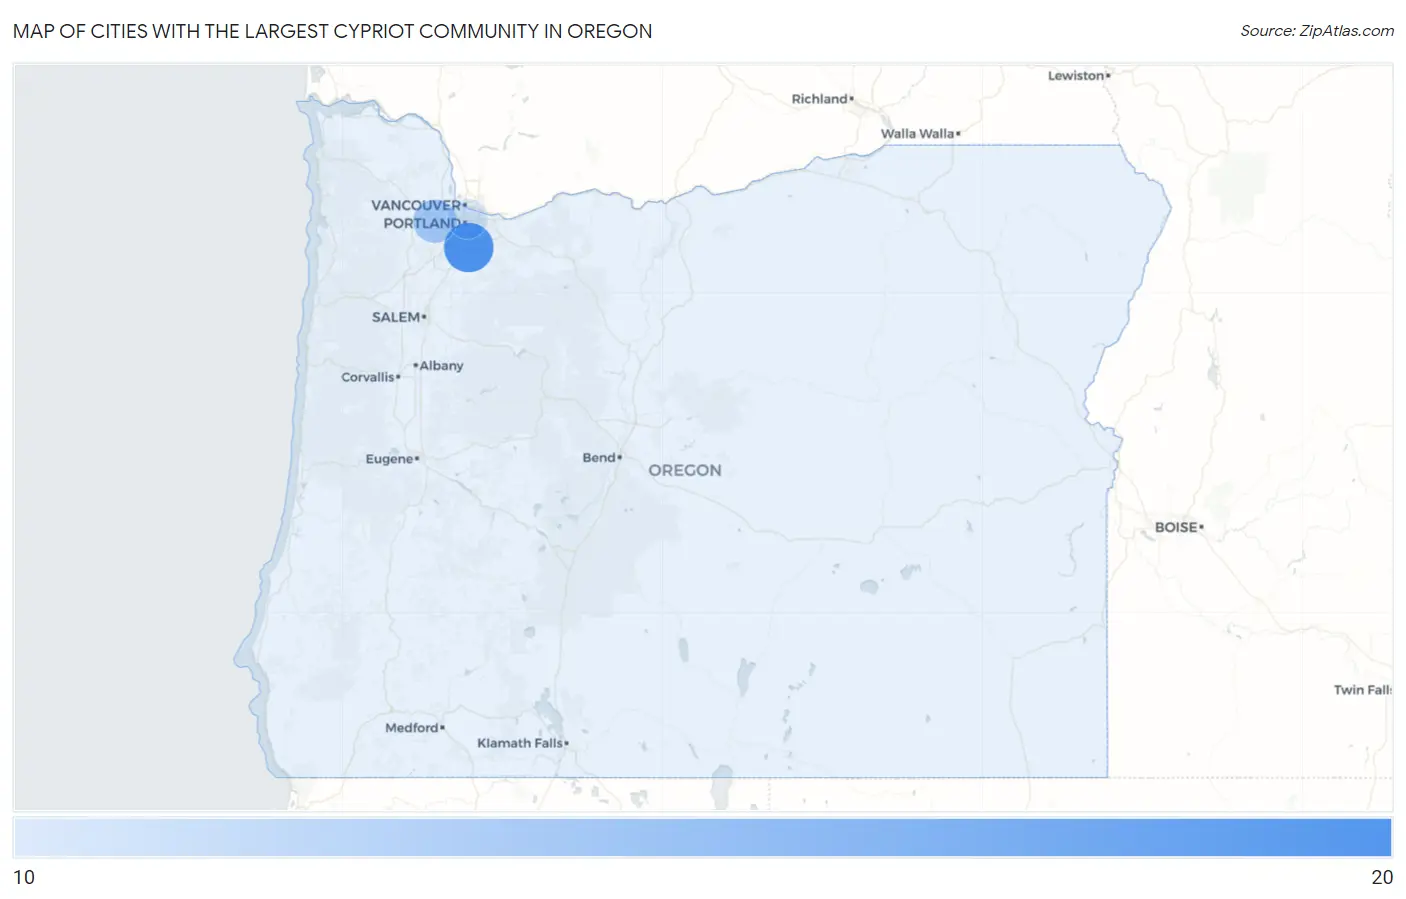 Cities with the Largest Cypriot Community in Oregon Map